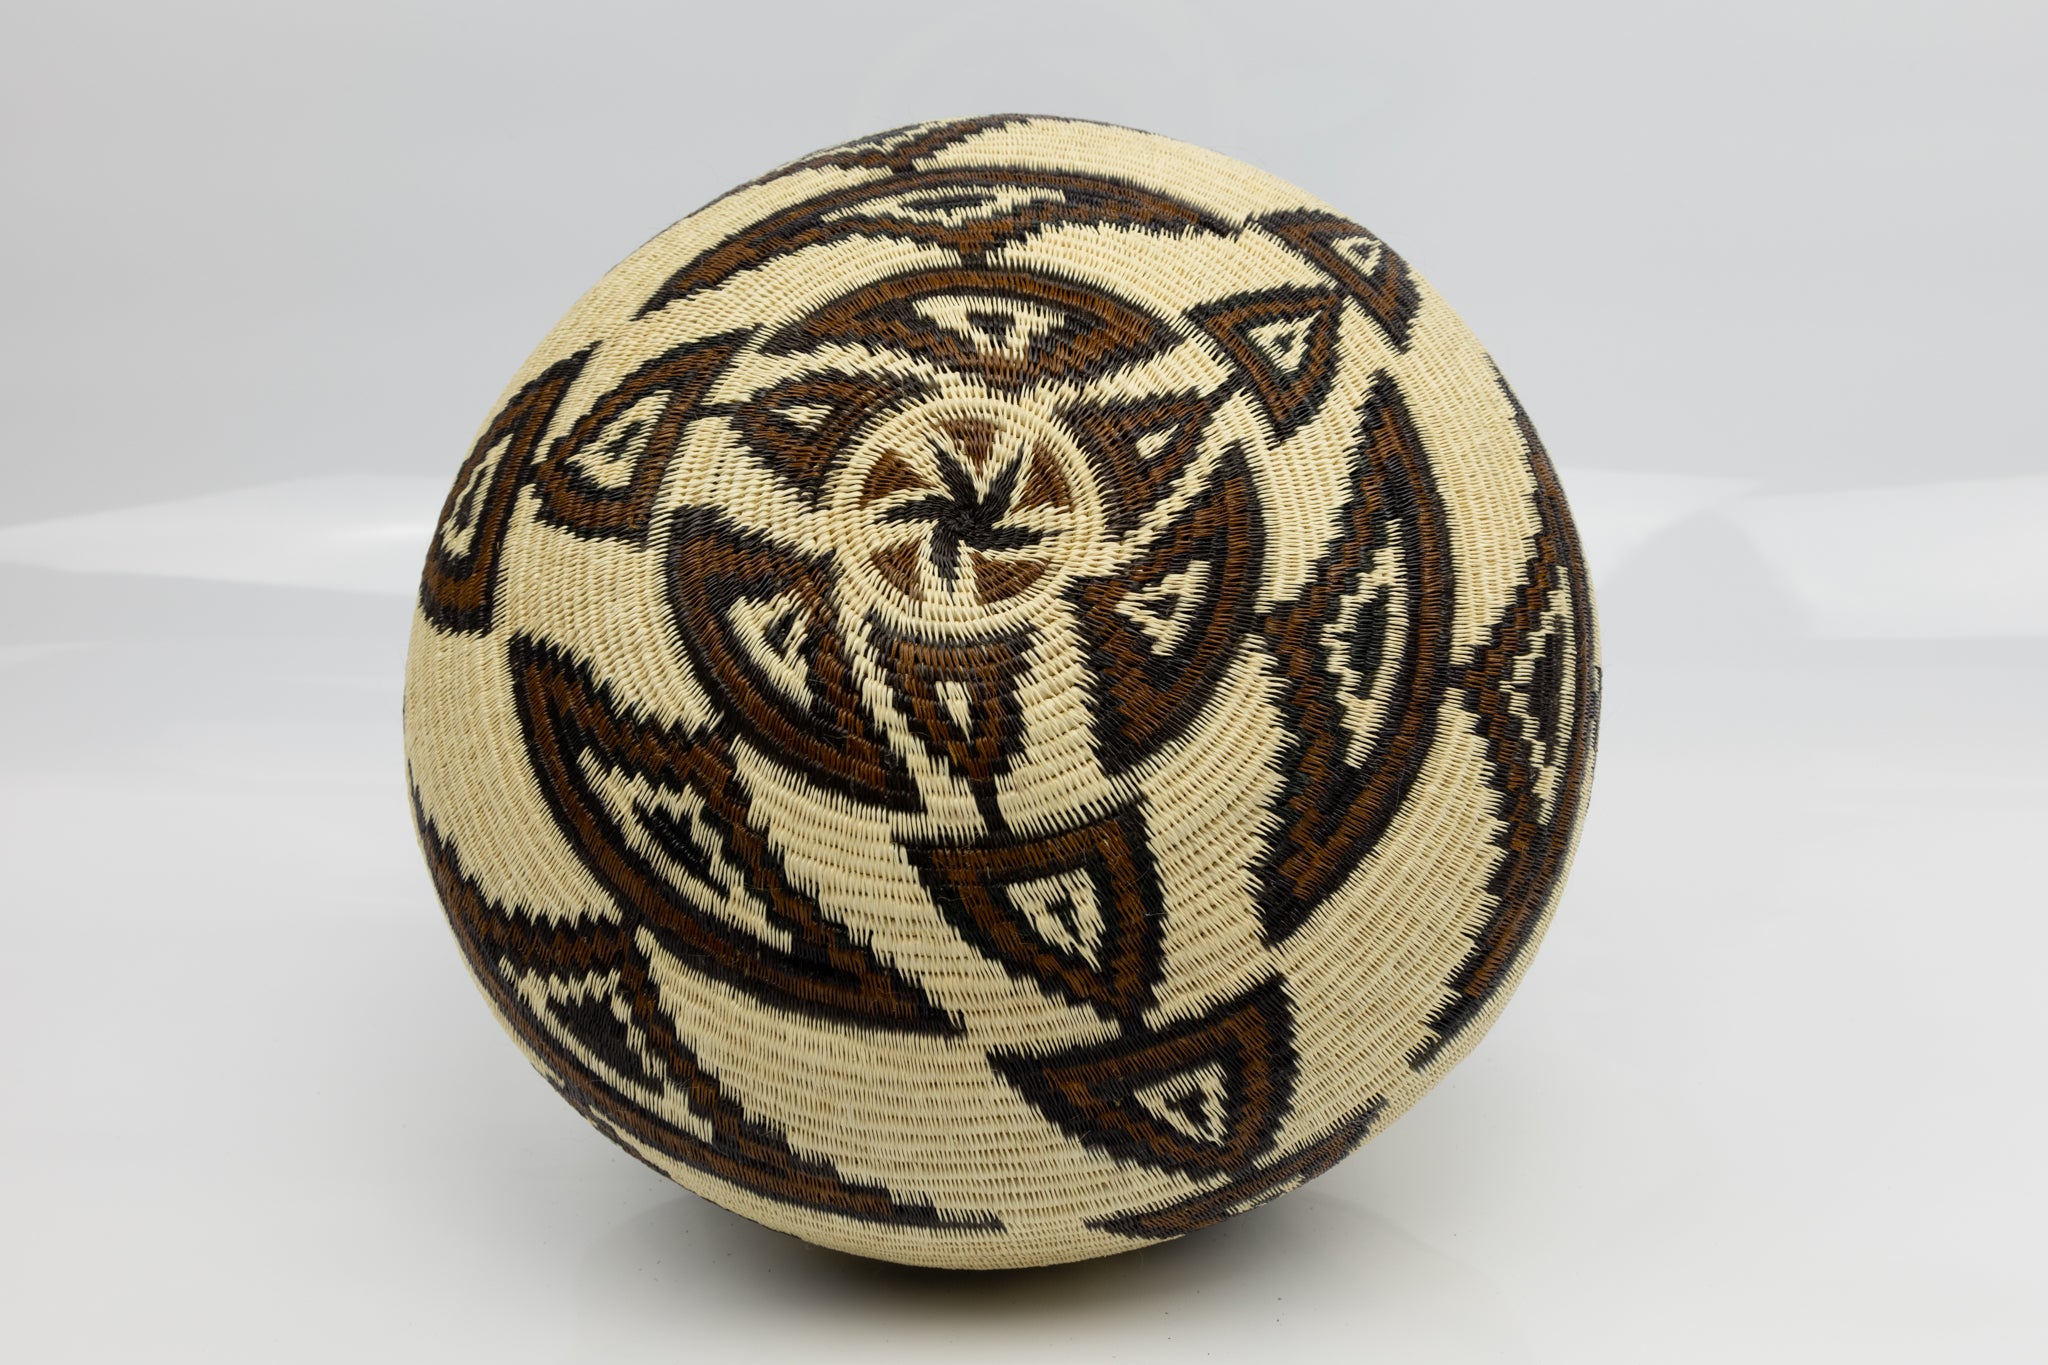 Wounaan classic design woven basket. Brown white and black.